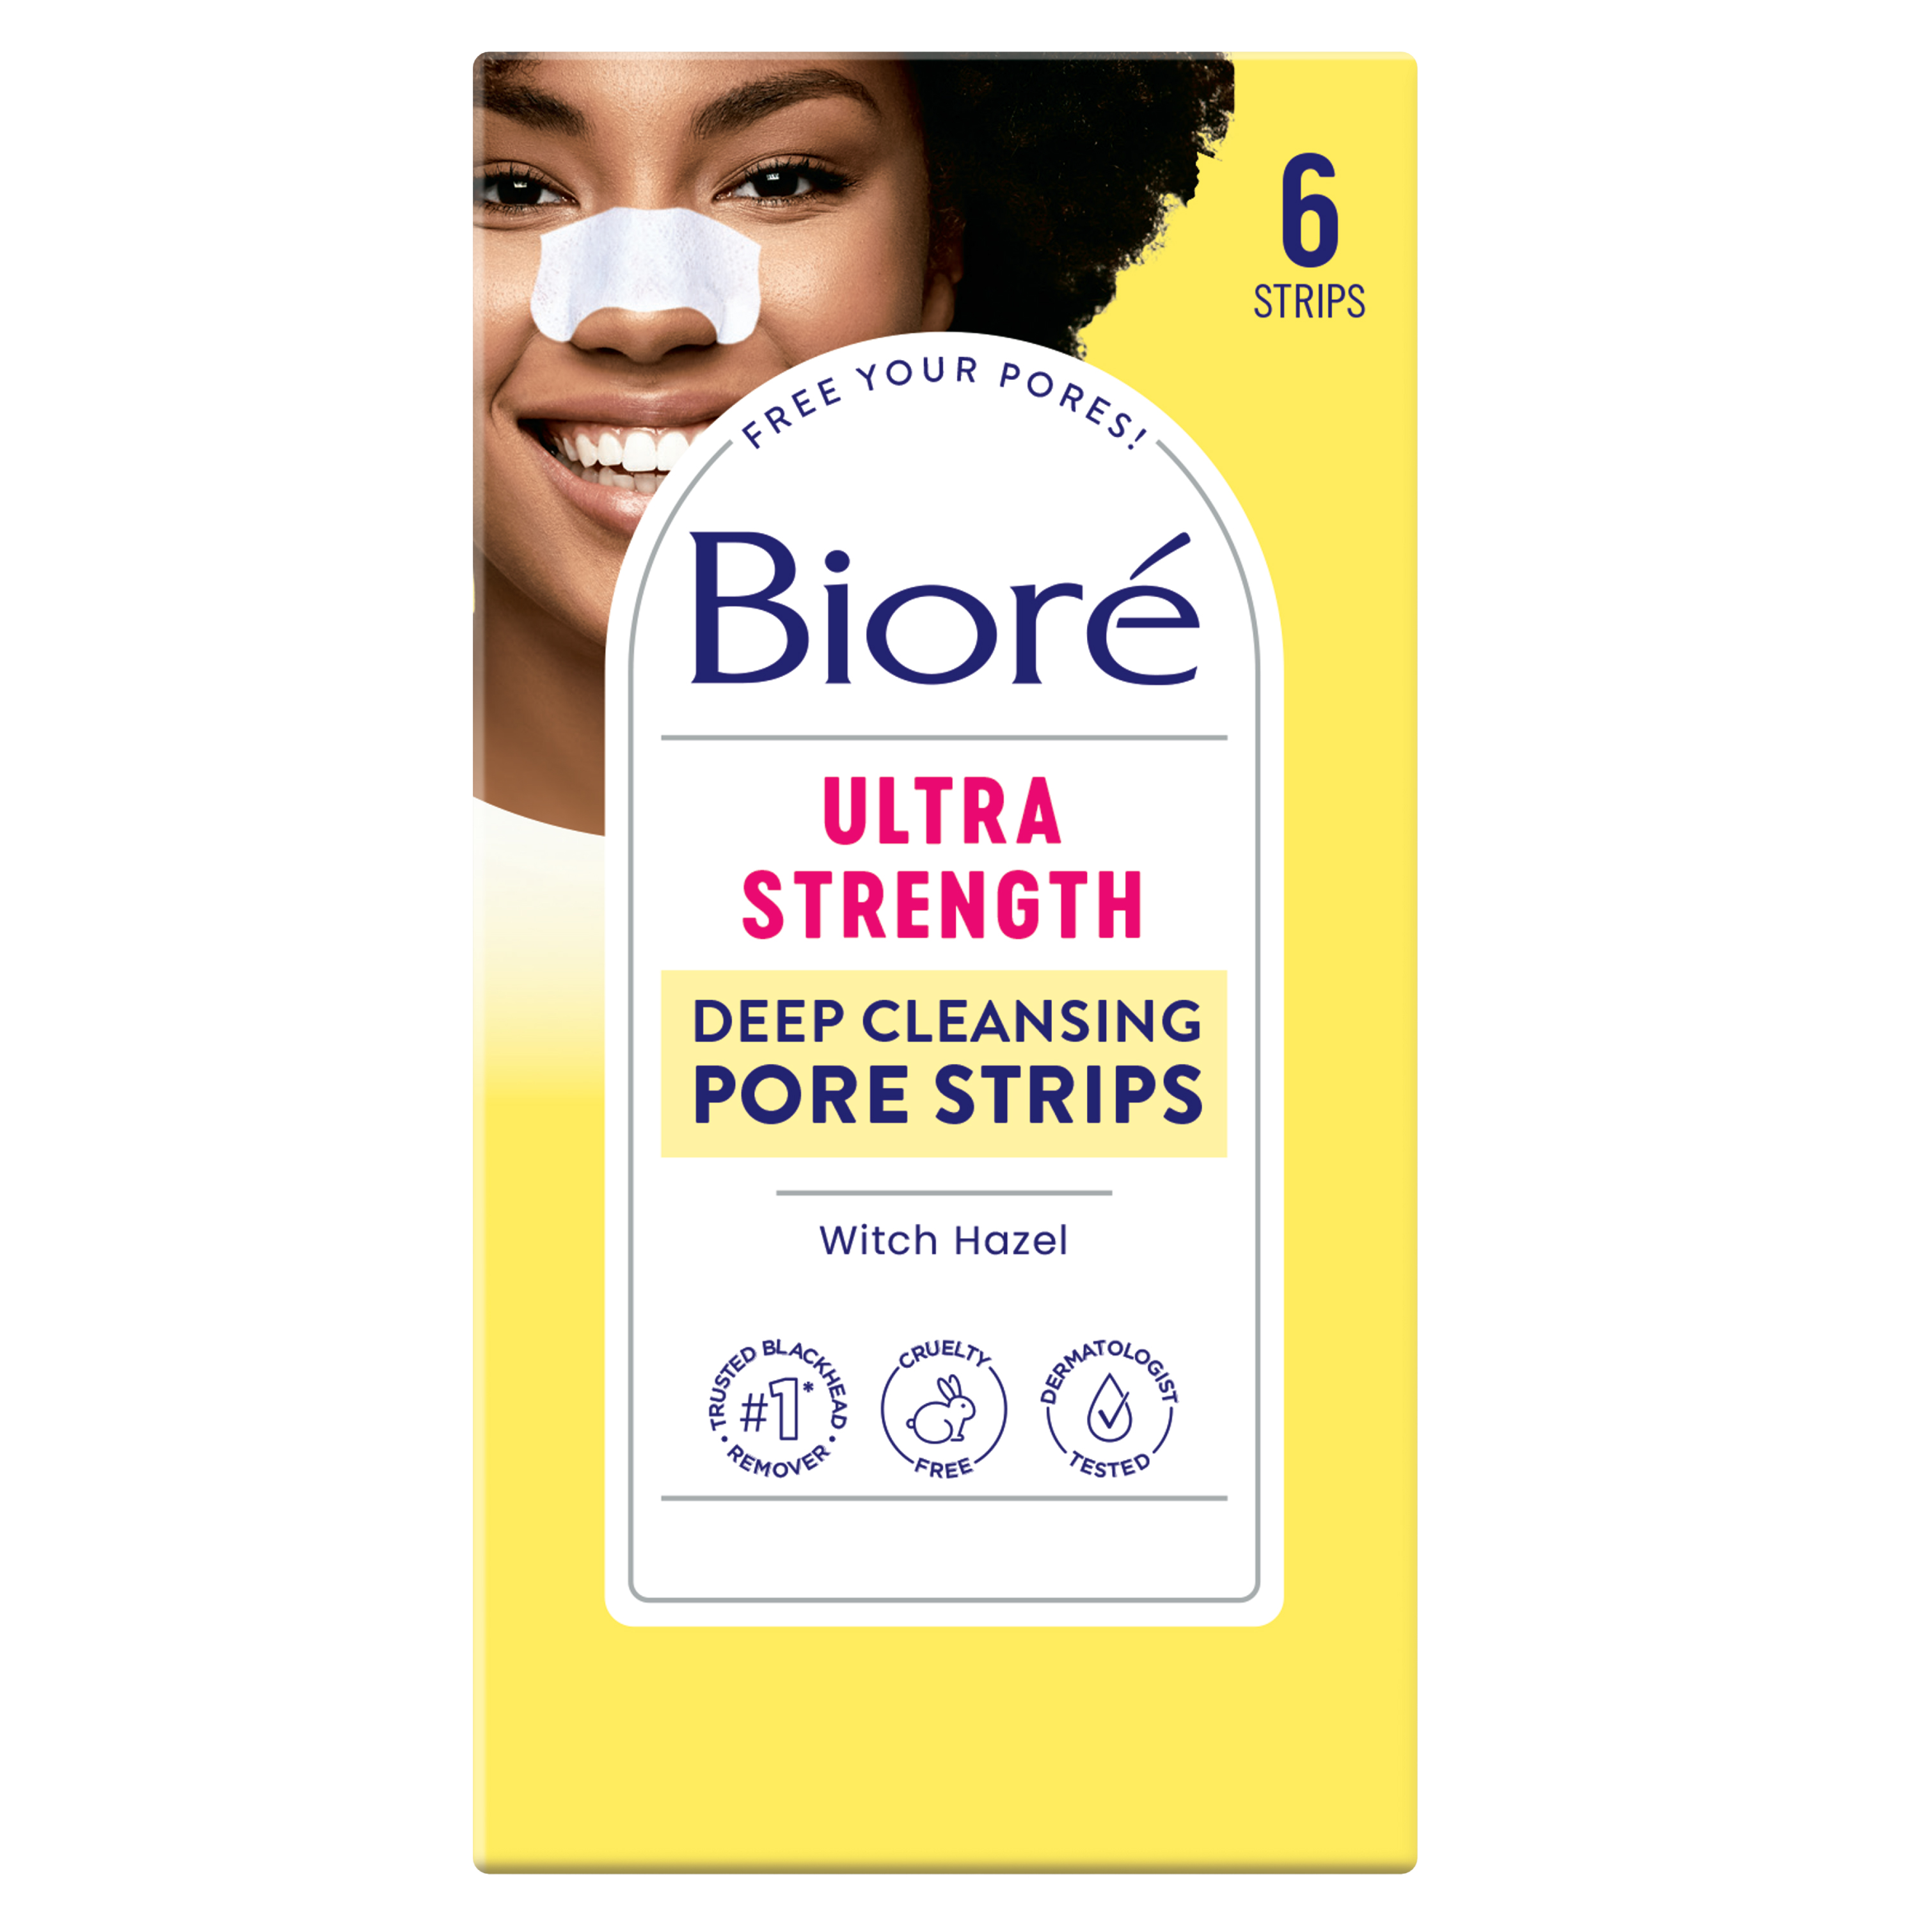 slide 1 of 5, Biore Witch Hazel Blackhead Remover Pore Strips, Nose Strips, Clears Pores up to 2x More than Original Pore Strips, features C-Bond Technology, Oil-Free, Non-Comedogenic Use, 6 Count, 6 ct